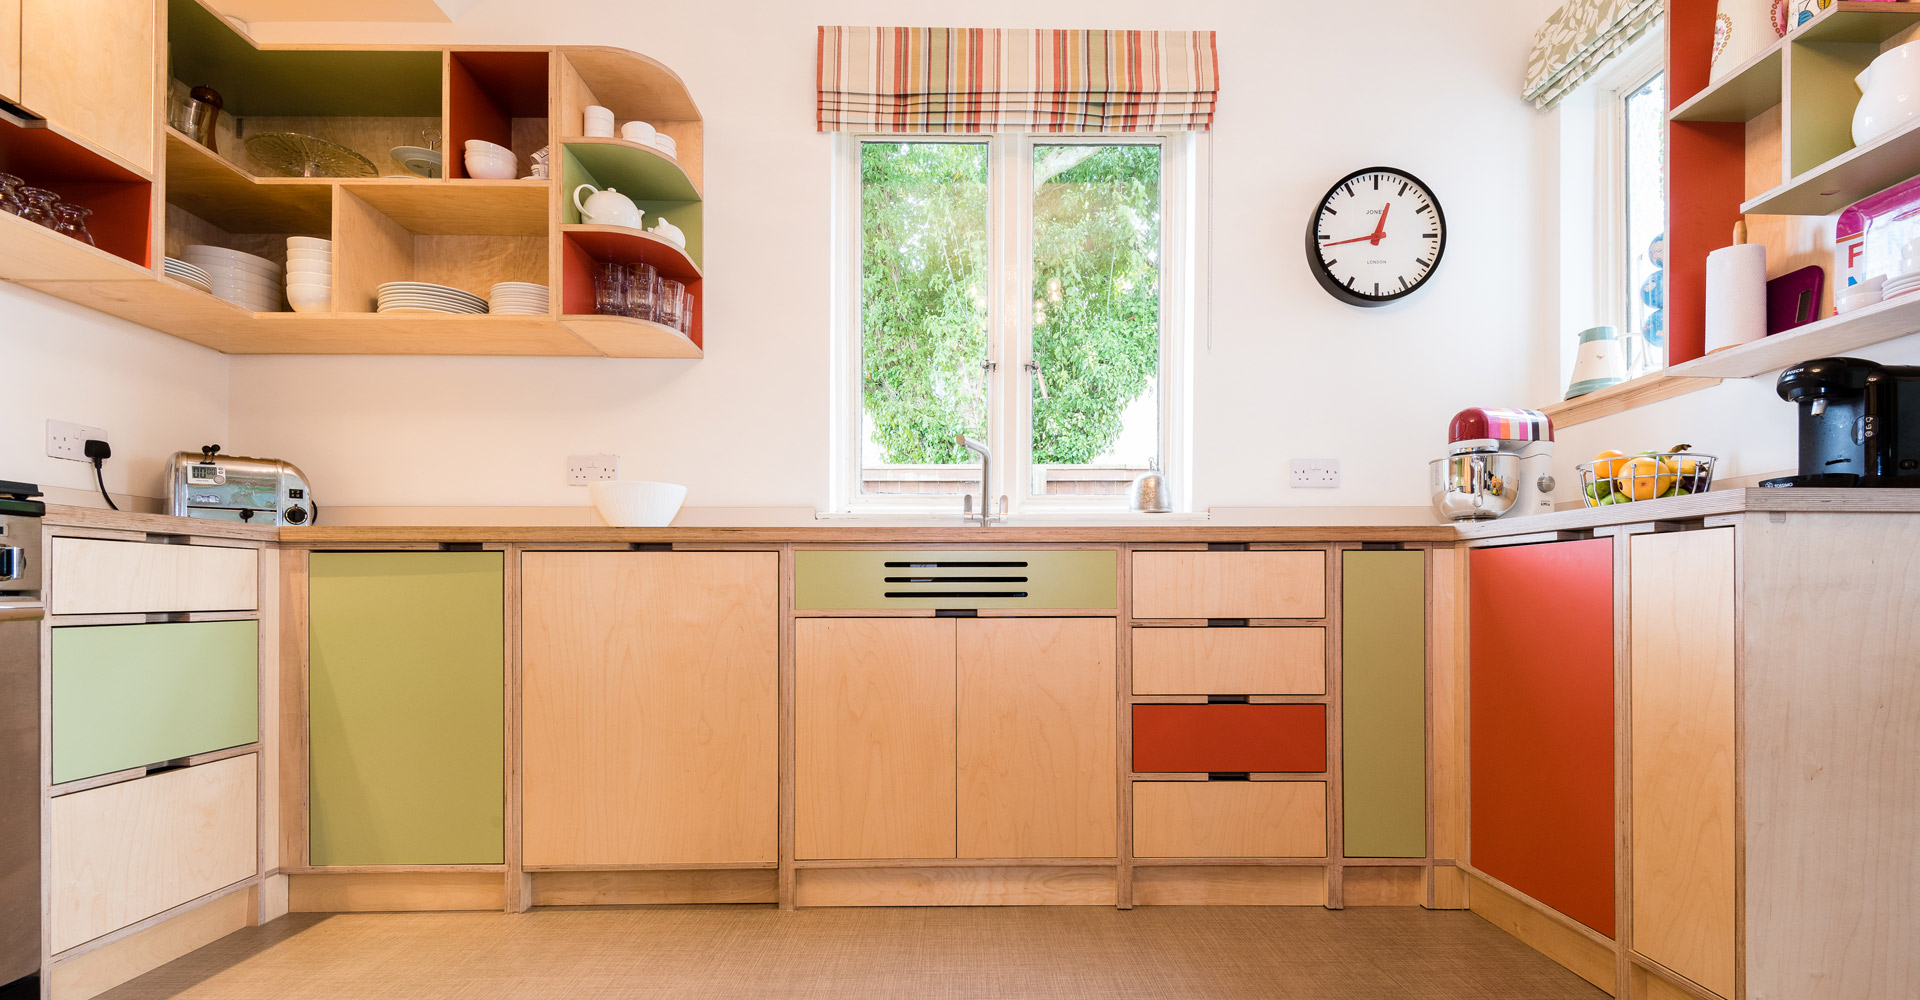 Simple Plywood Kitchen Cabinets Online Uk with Simple Decor